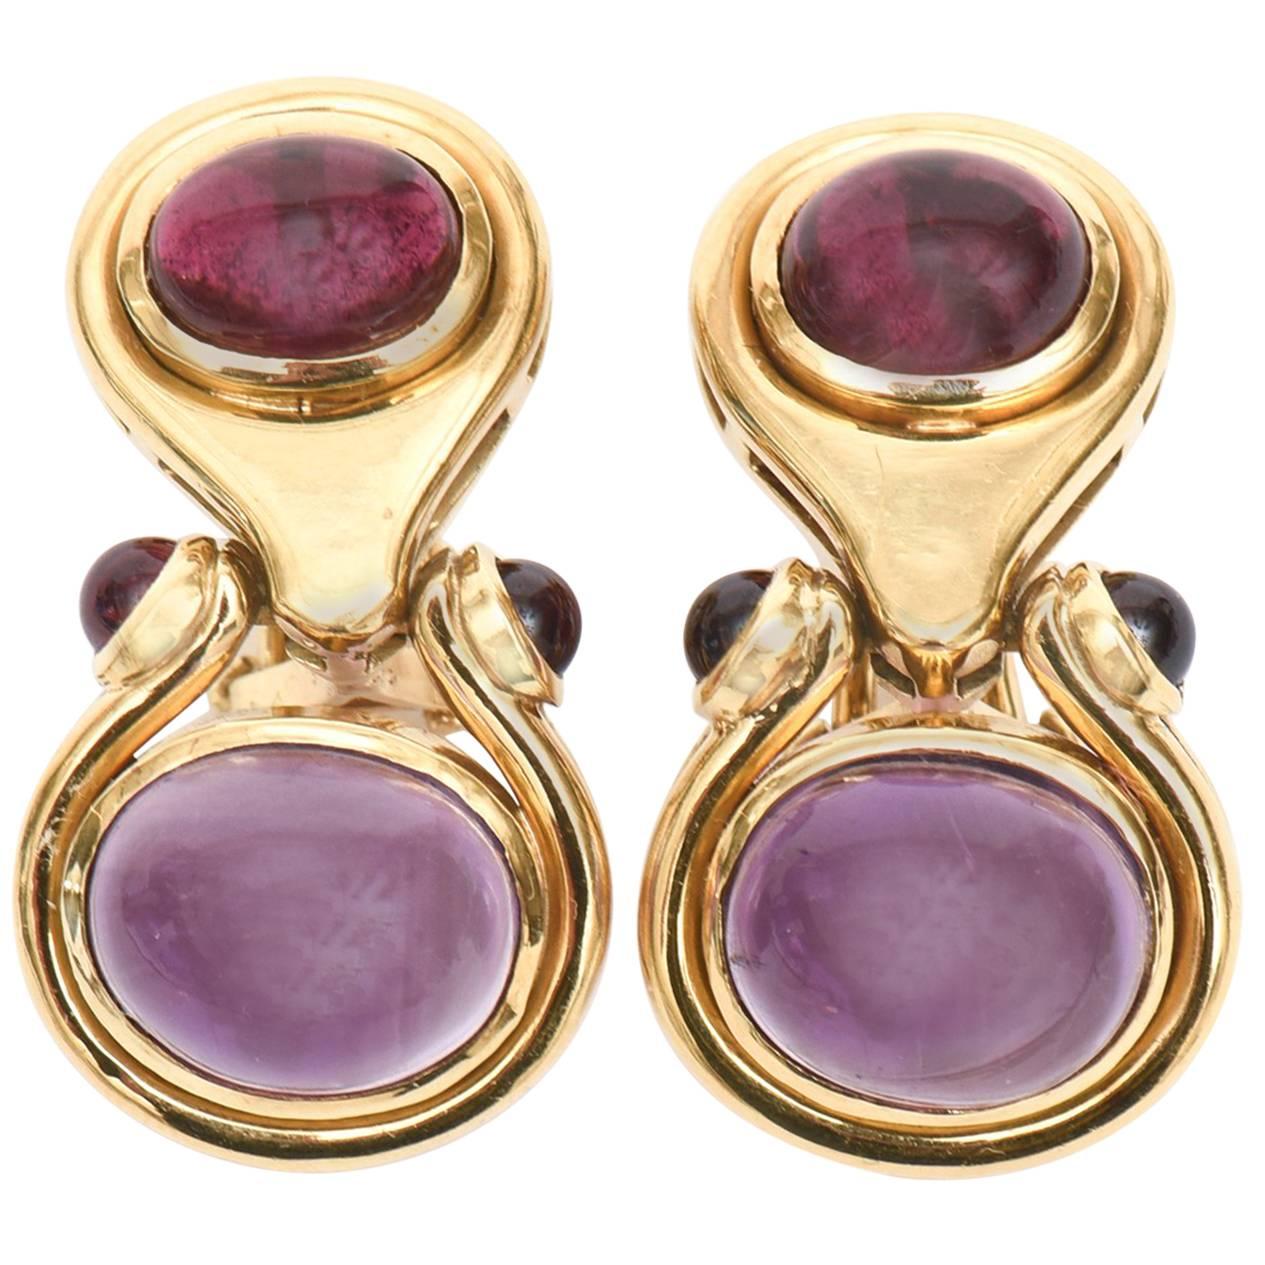 Pair of Cabochon Amethyst &18K Yellow Gold Pierced Lever Back Earrings